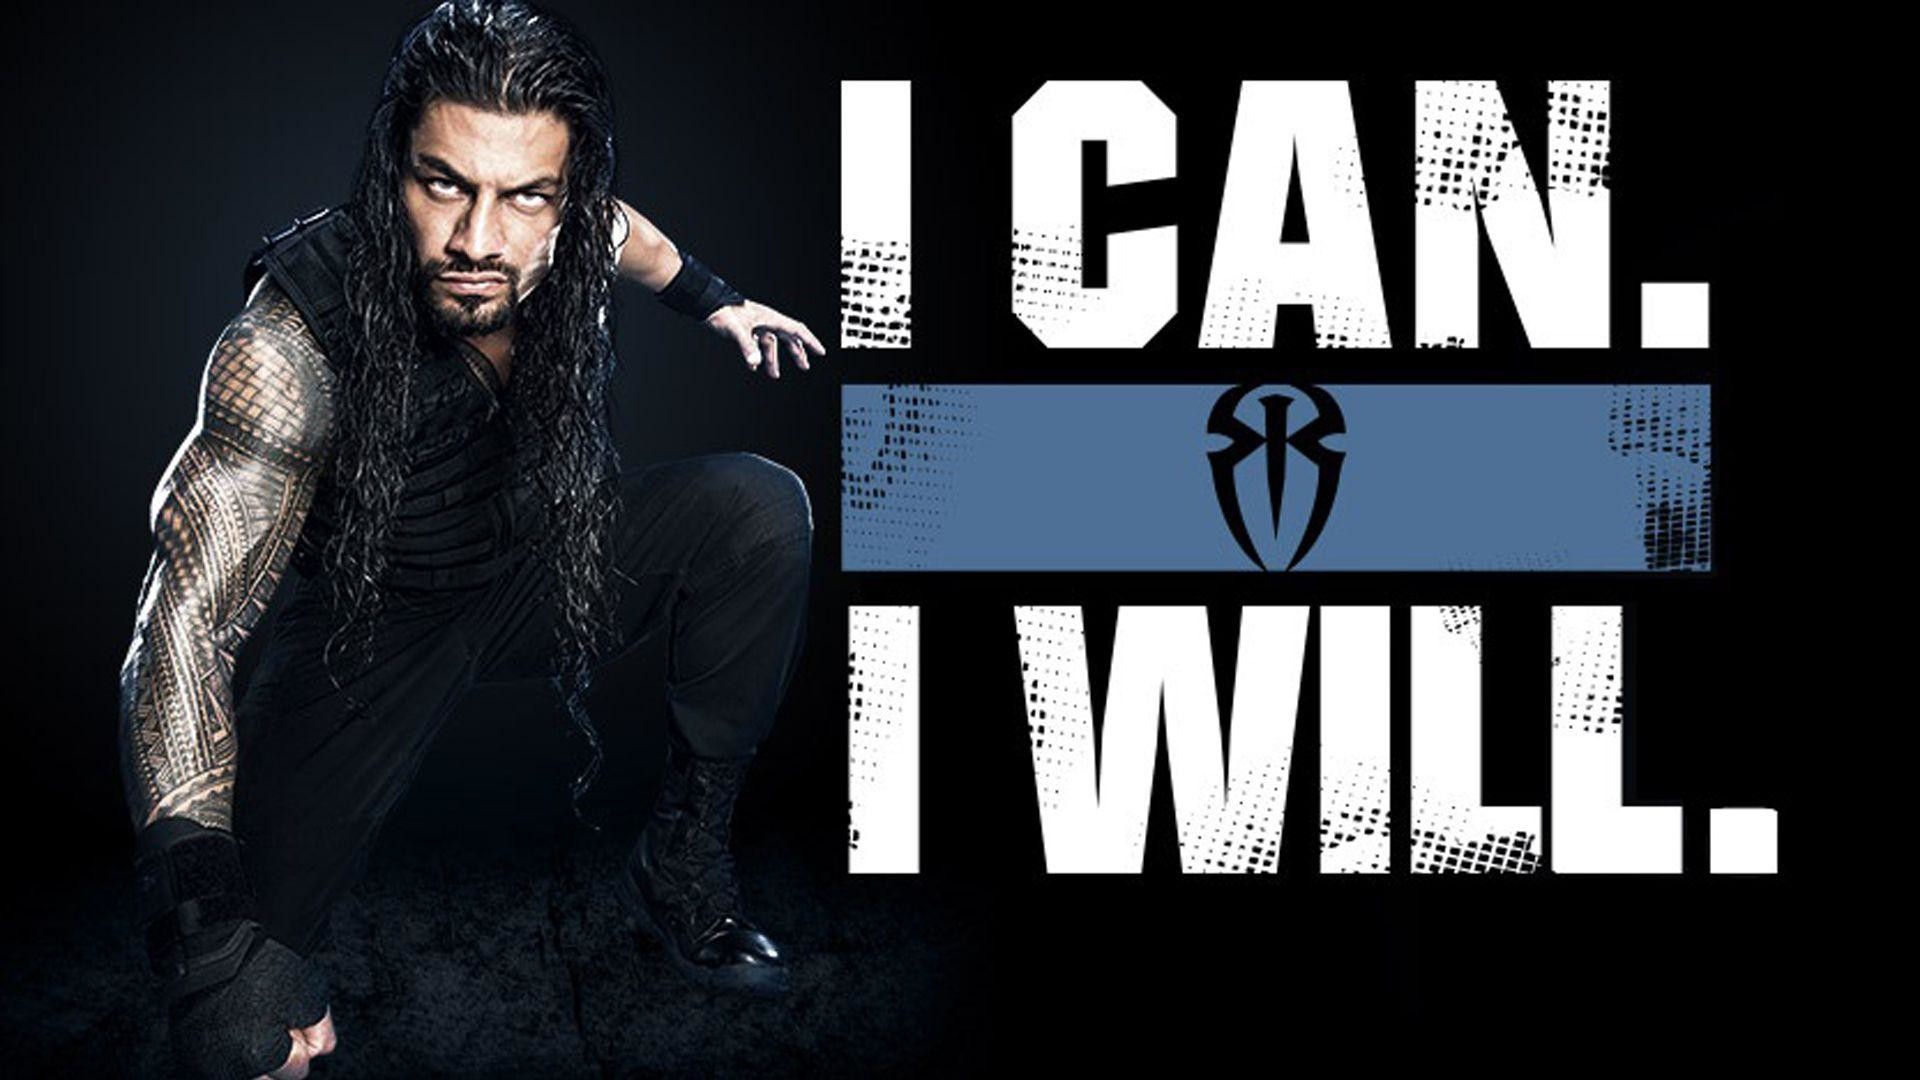 Cool Wwe Wallpapers Wallpapers